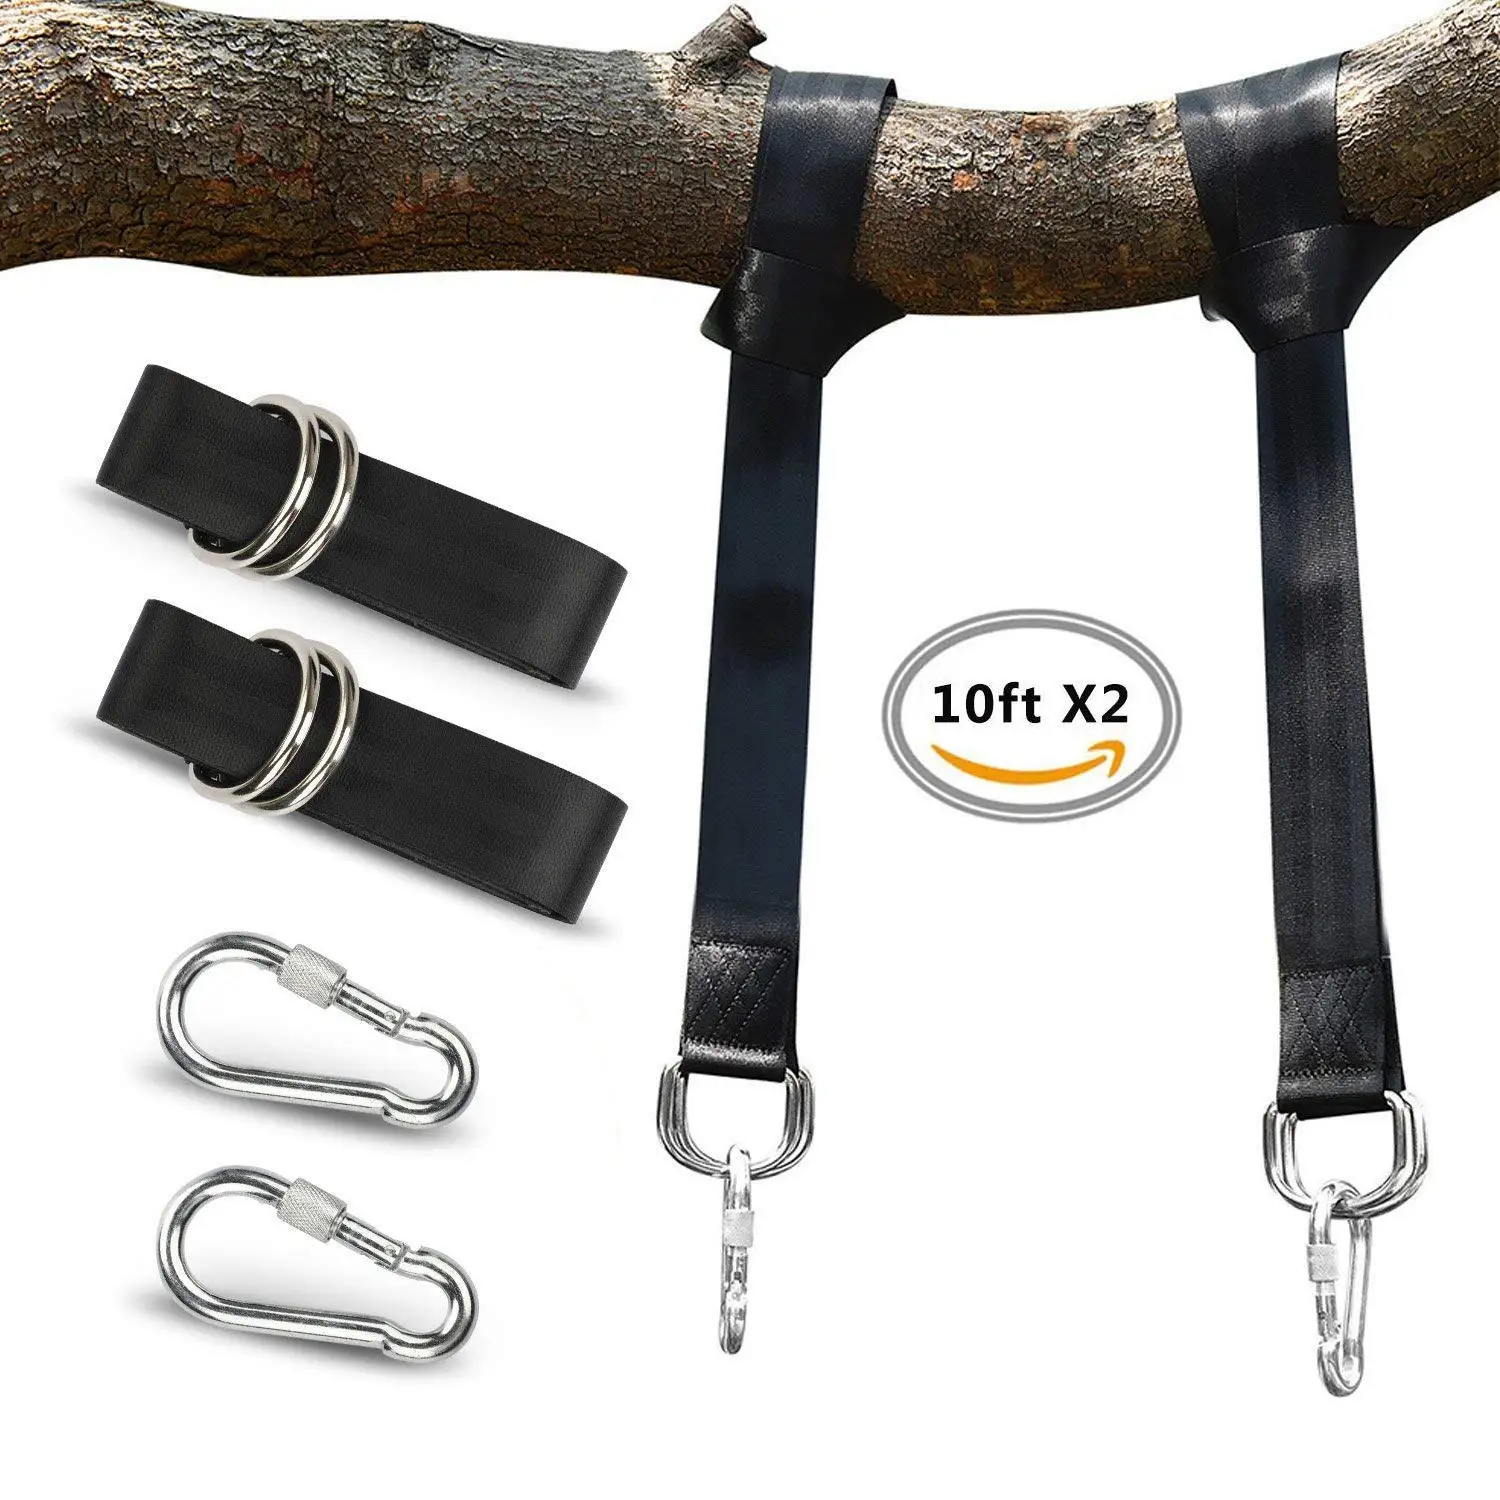 Cheap Tree Support Straps, find Tree Support Straps deals on line at ...